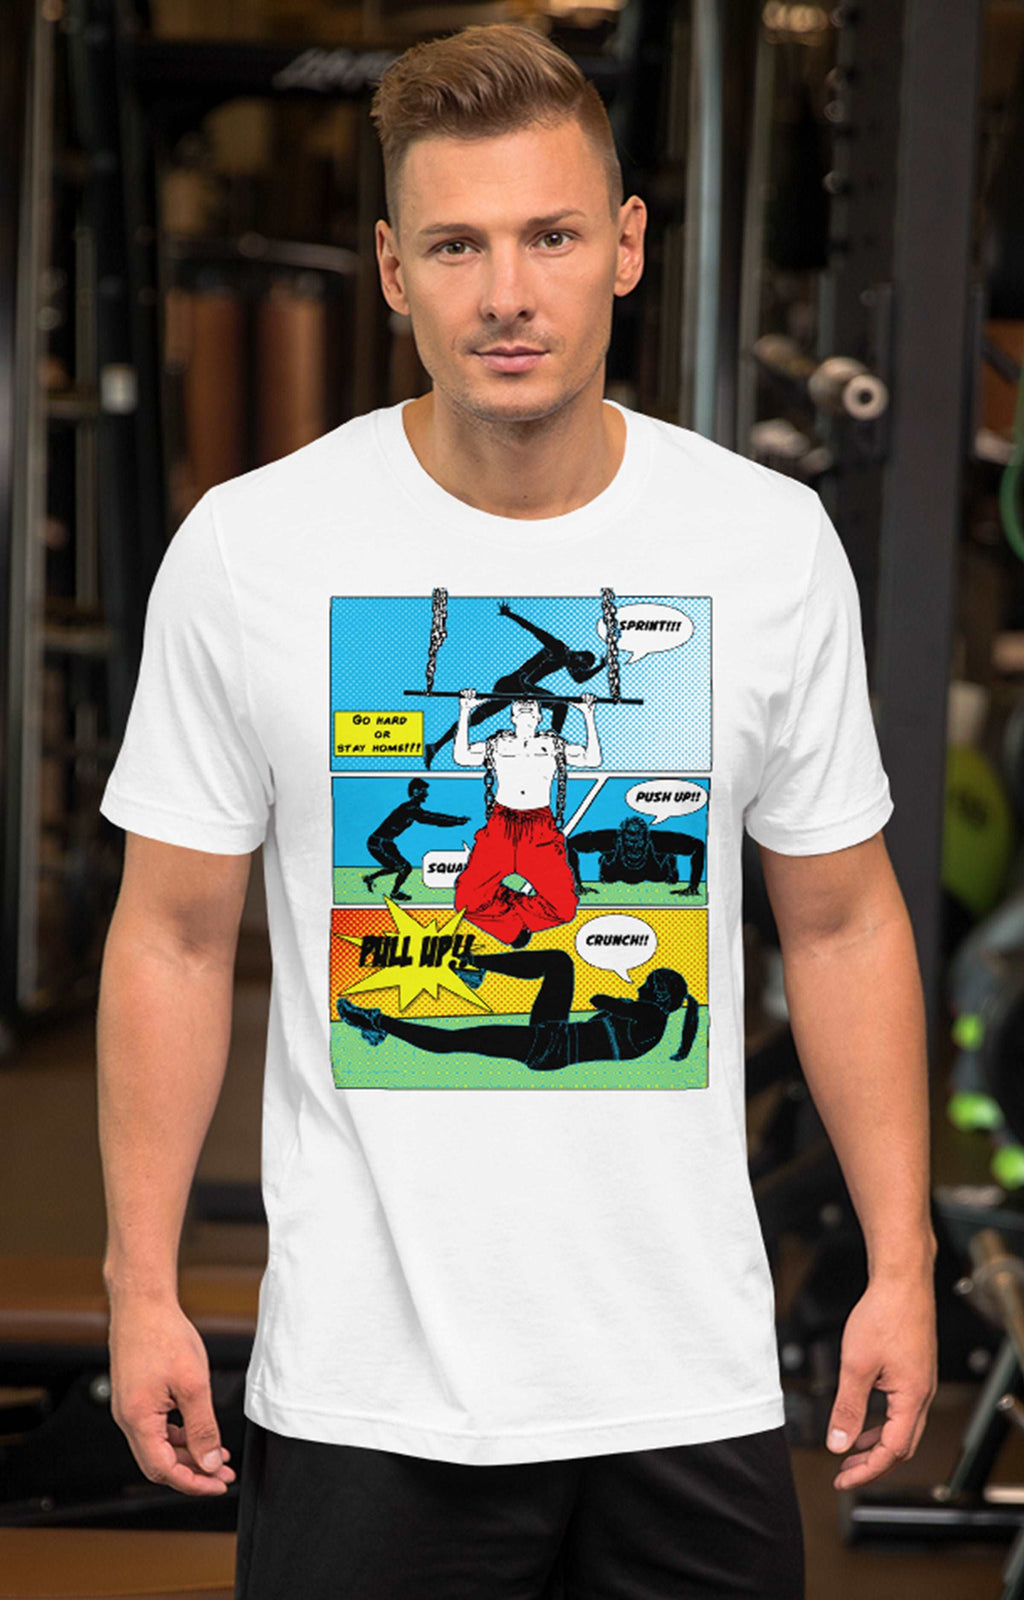 Work out T-shirt